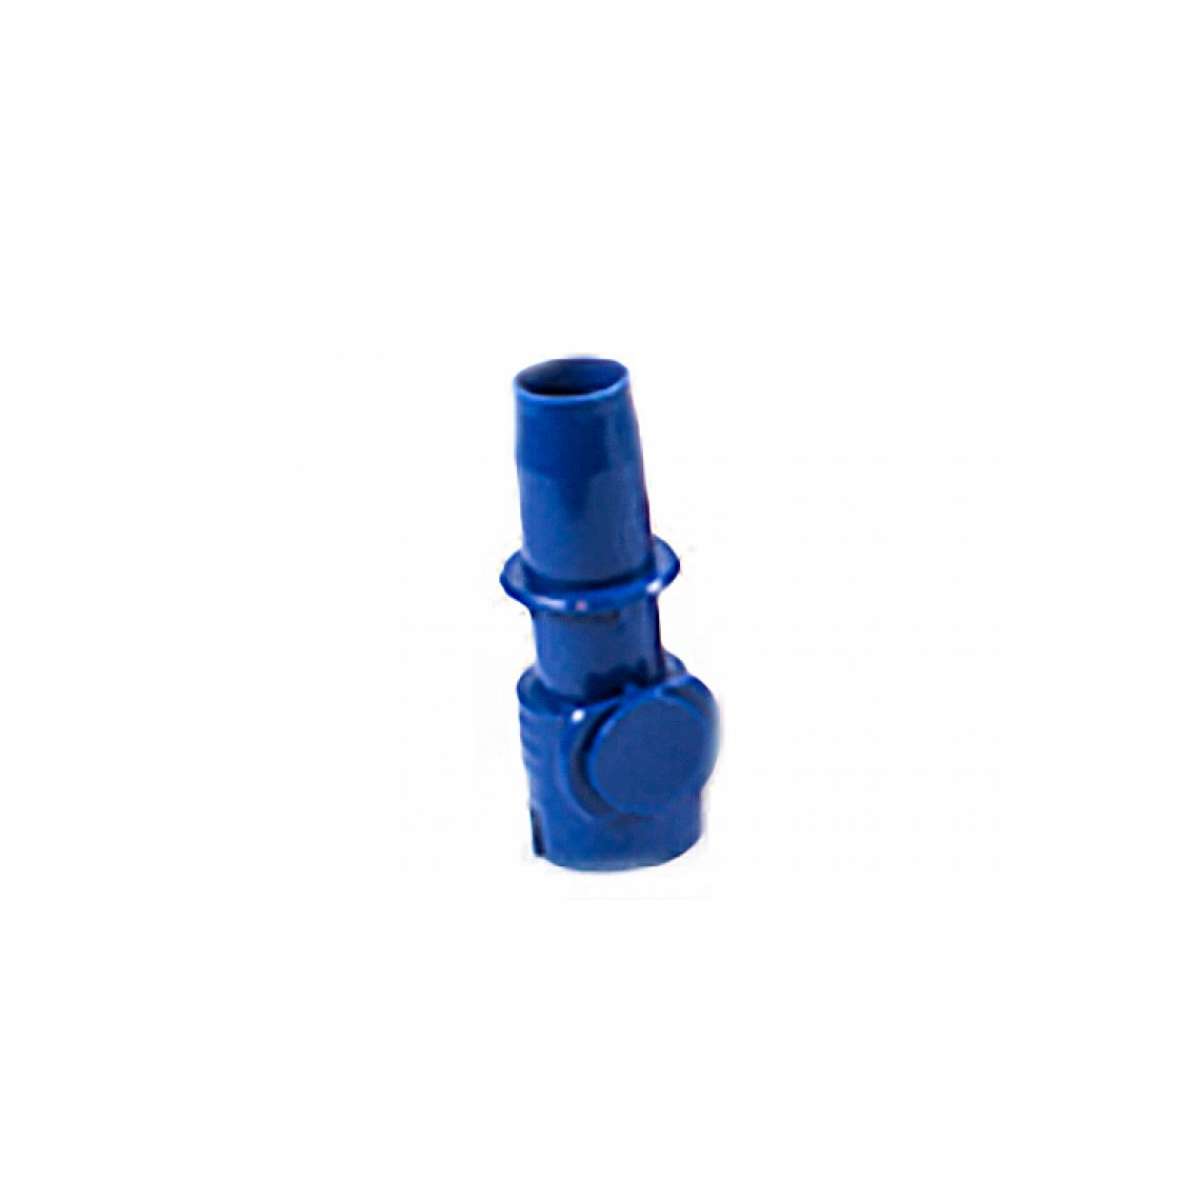 IsoLink 5" Rigid Spout with 1" Tip - Blue